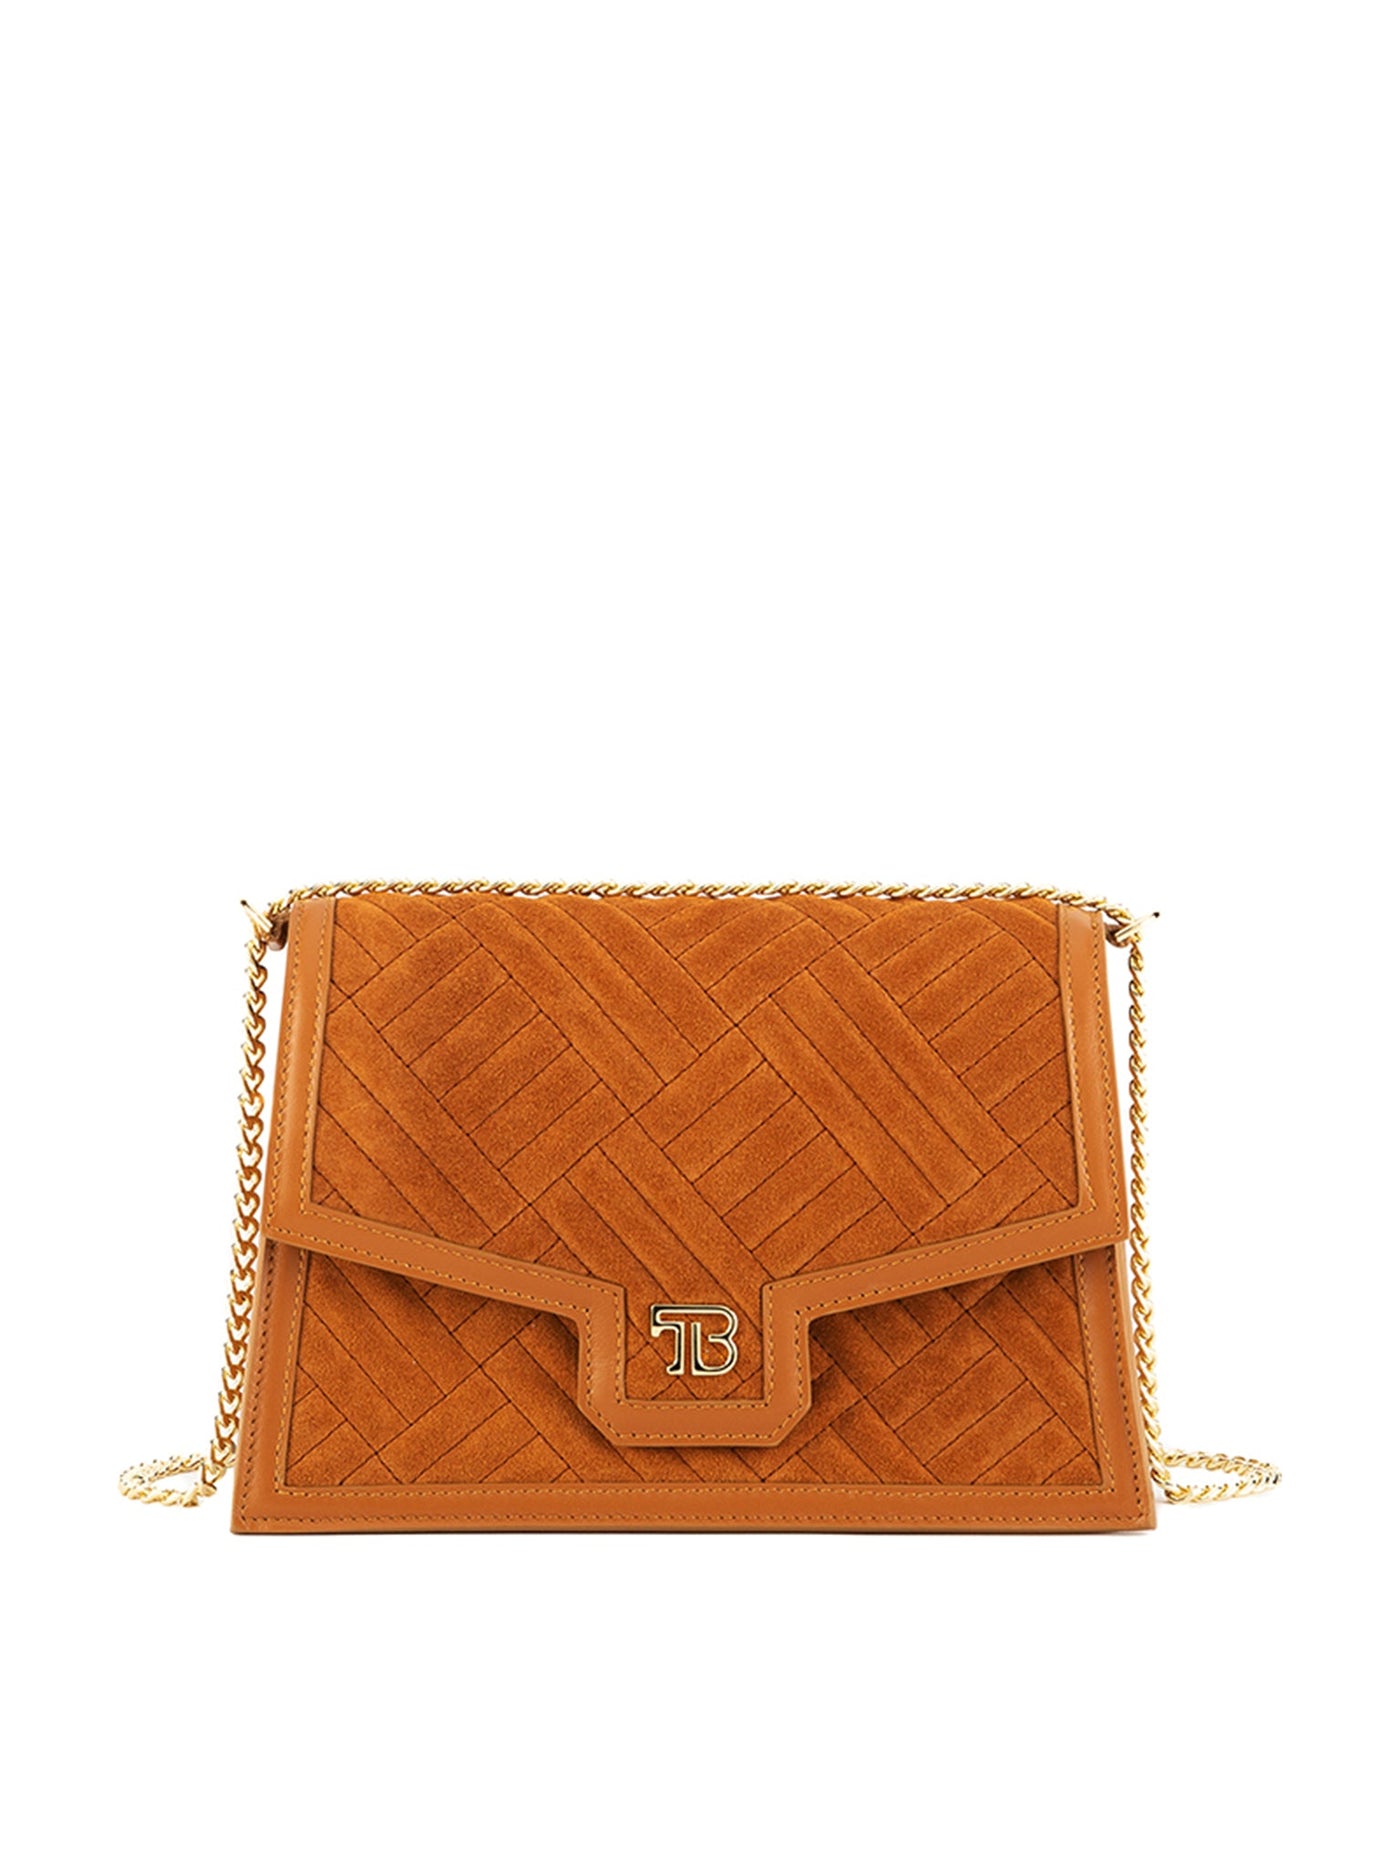 Sophia Duo Leather 9 - Camel Brown by Teddy Blake